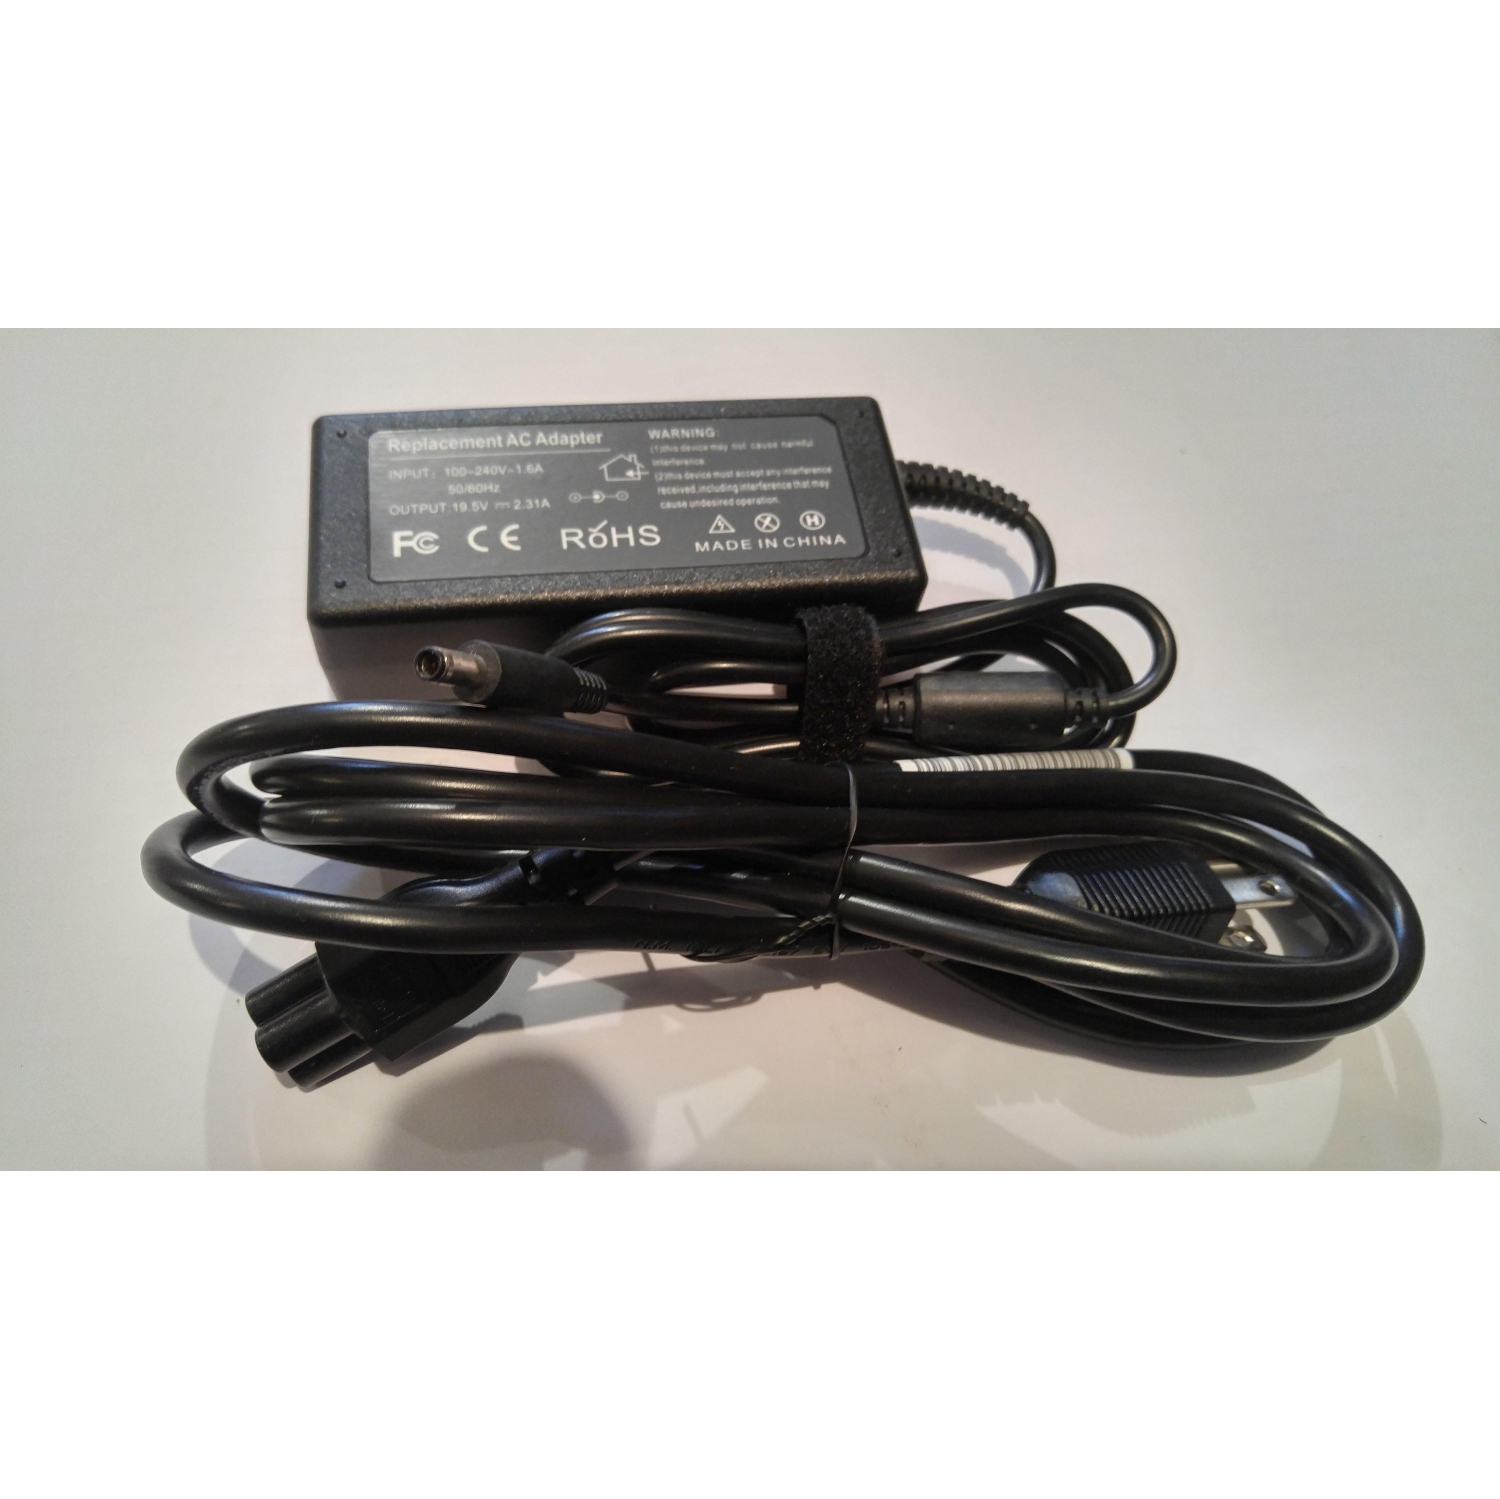 New Compatible Dell Inspiron 5000 dncwlg2502smp Series AC Adapter Charger